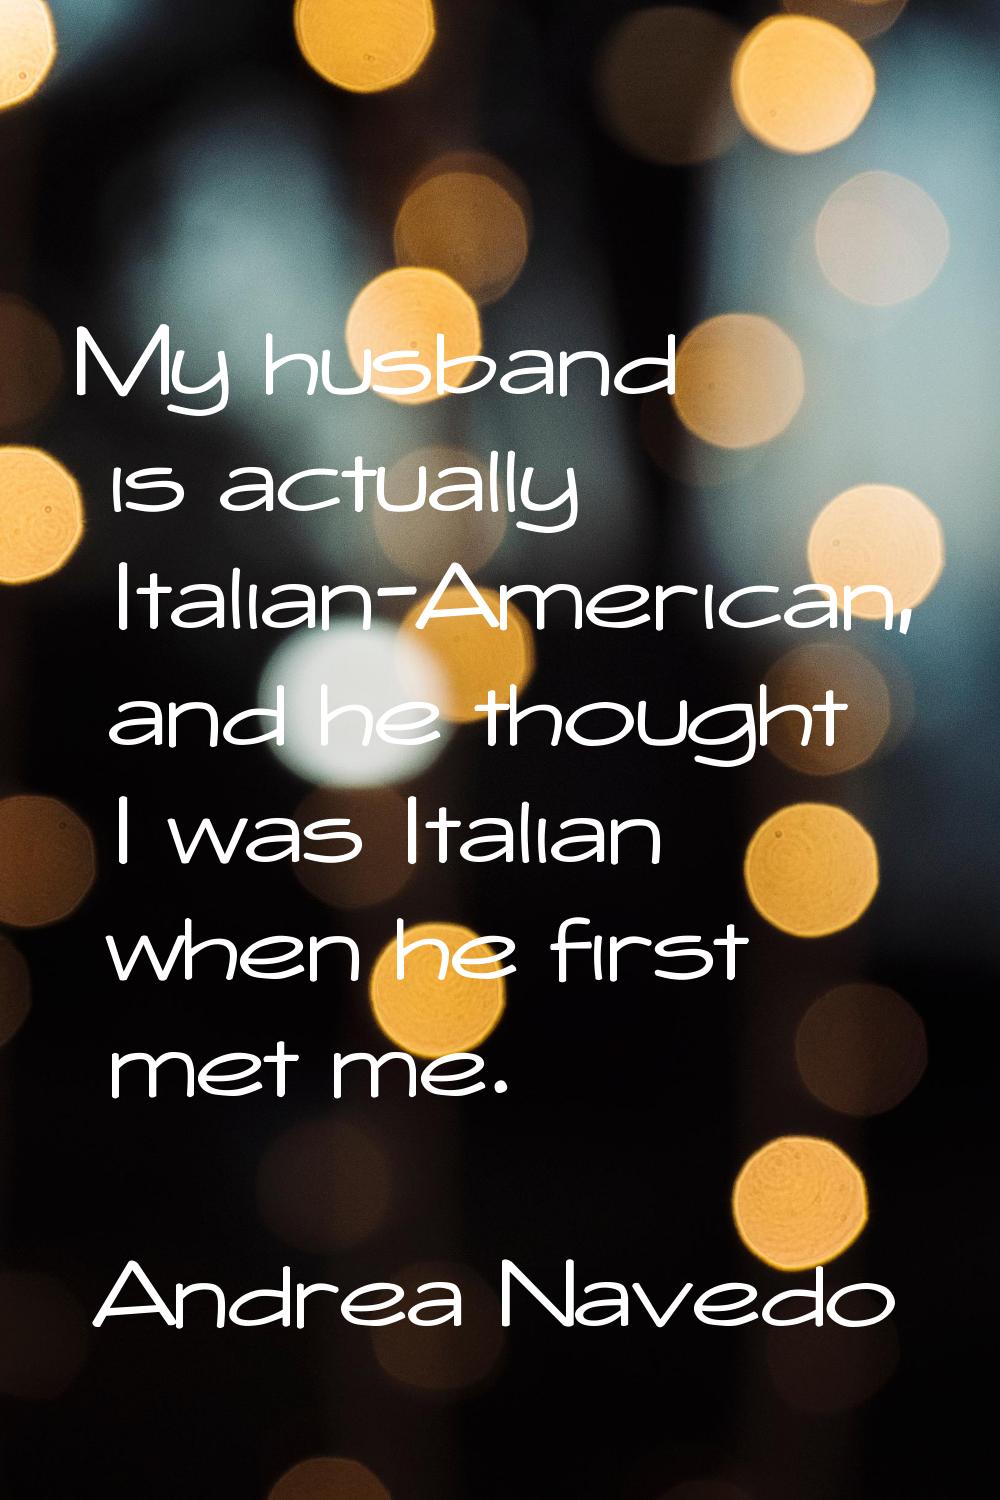 My husband is actually Italian-American, and he thought I was Italian when he first met me.